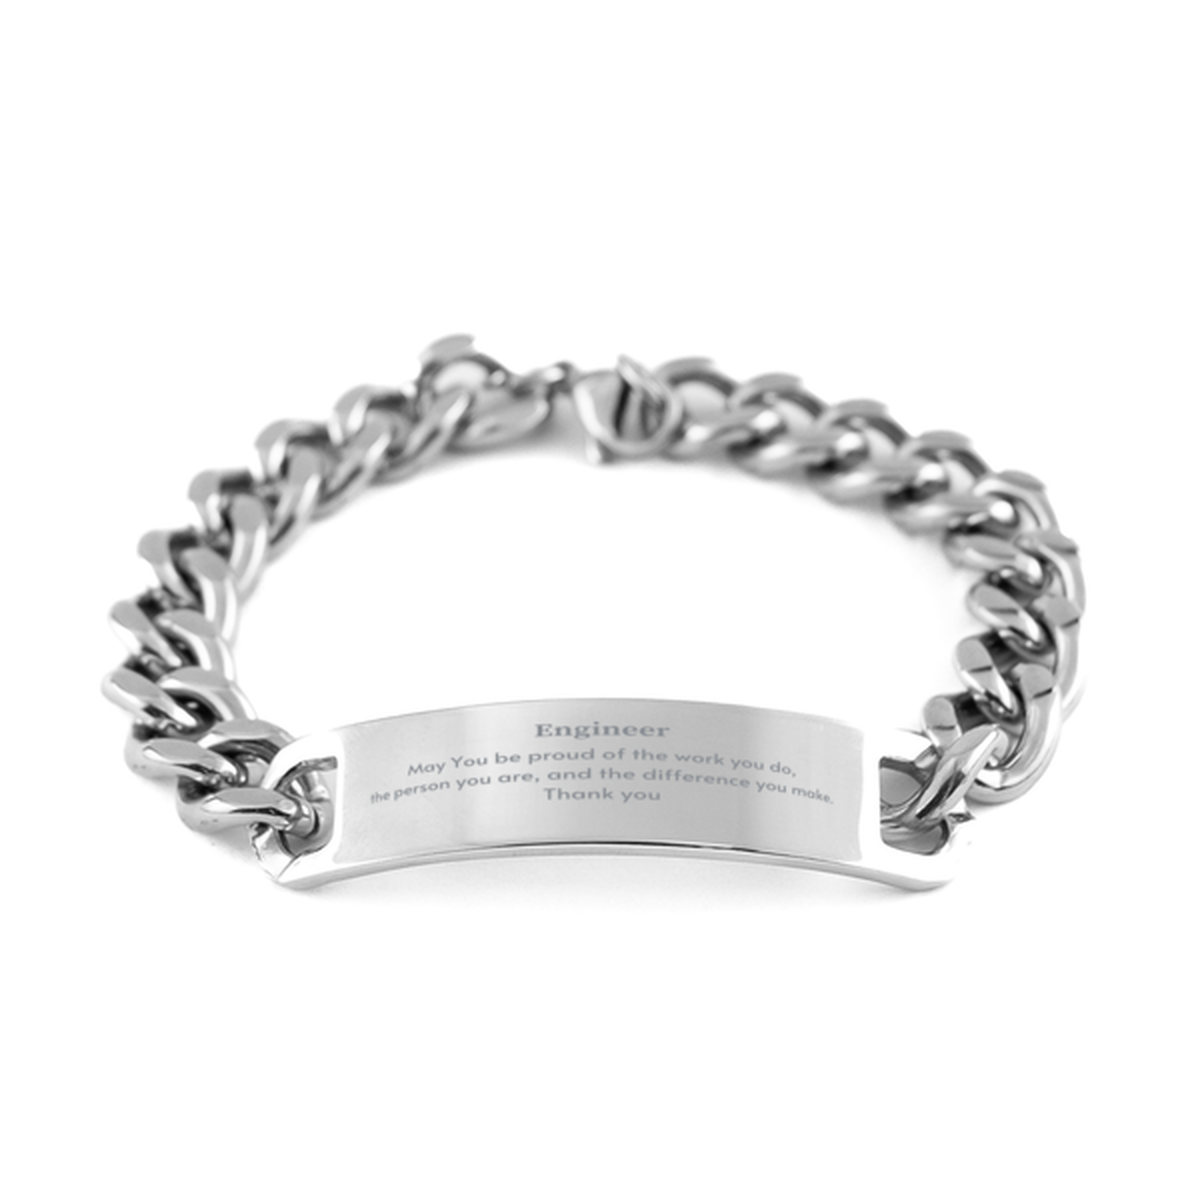 Heartwarming Cuban Chain Stainless Steel Bracelet Retirement Coworkers Gifts for Engineer, Engineer May You be proud of the work you do, the person you are Gifts for Boss Men Women Friends